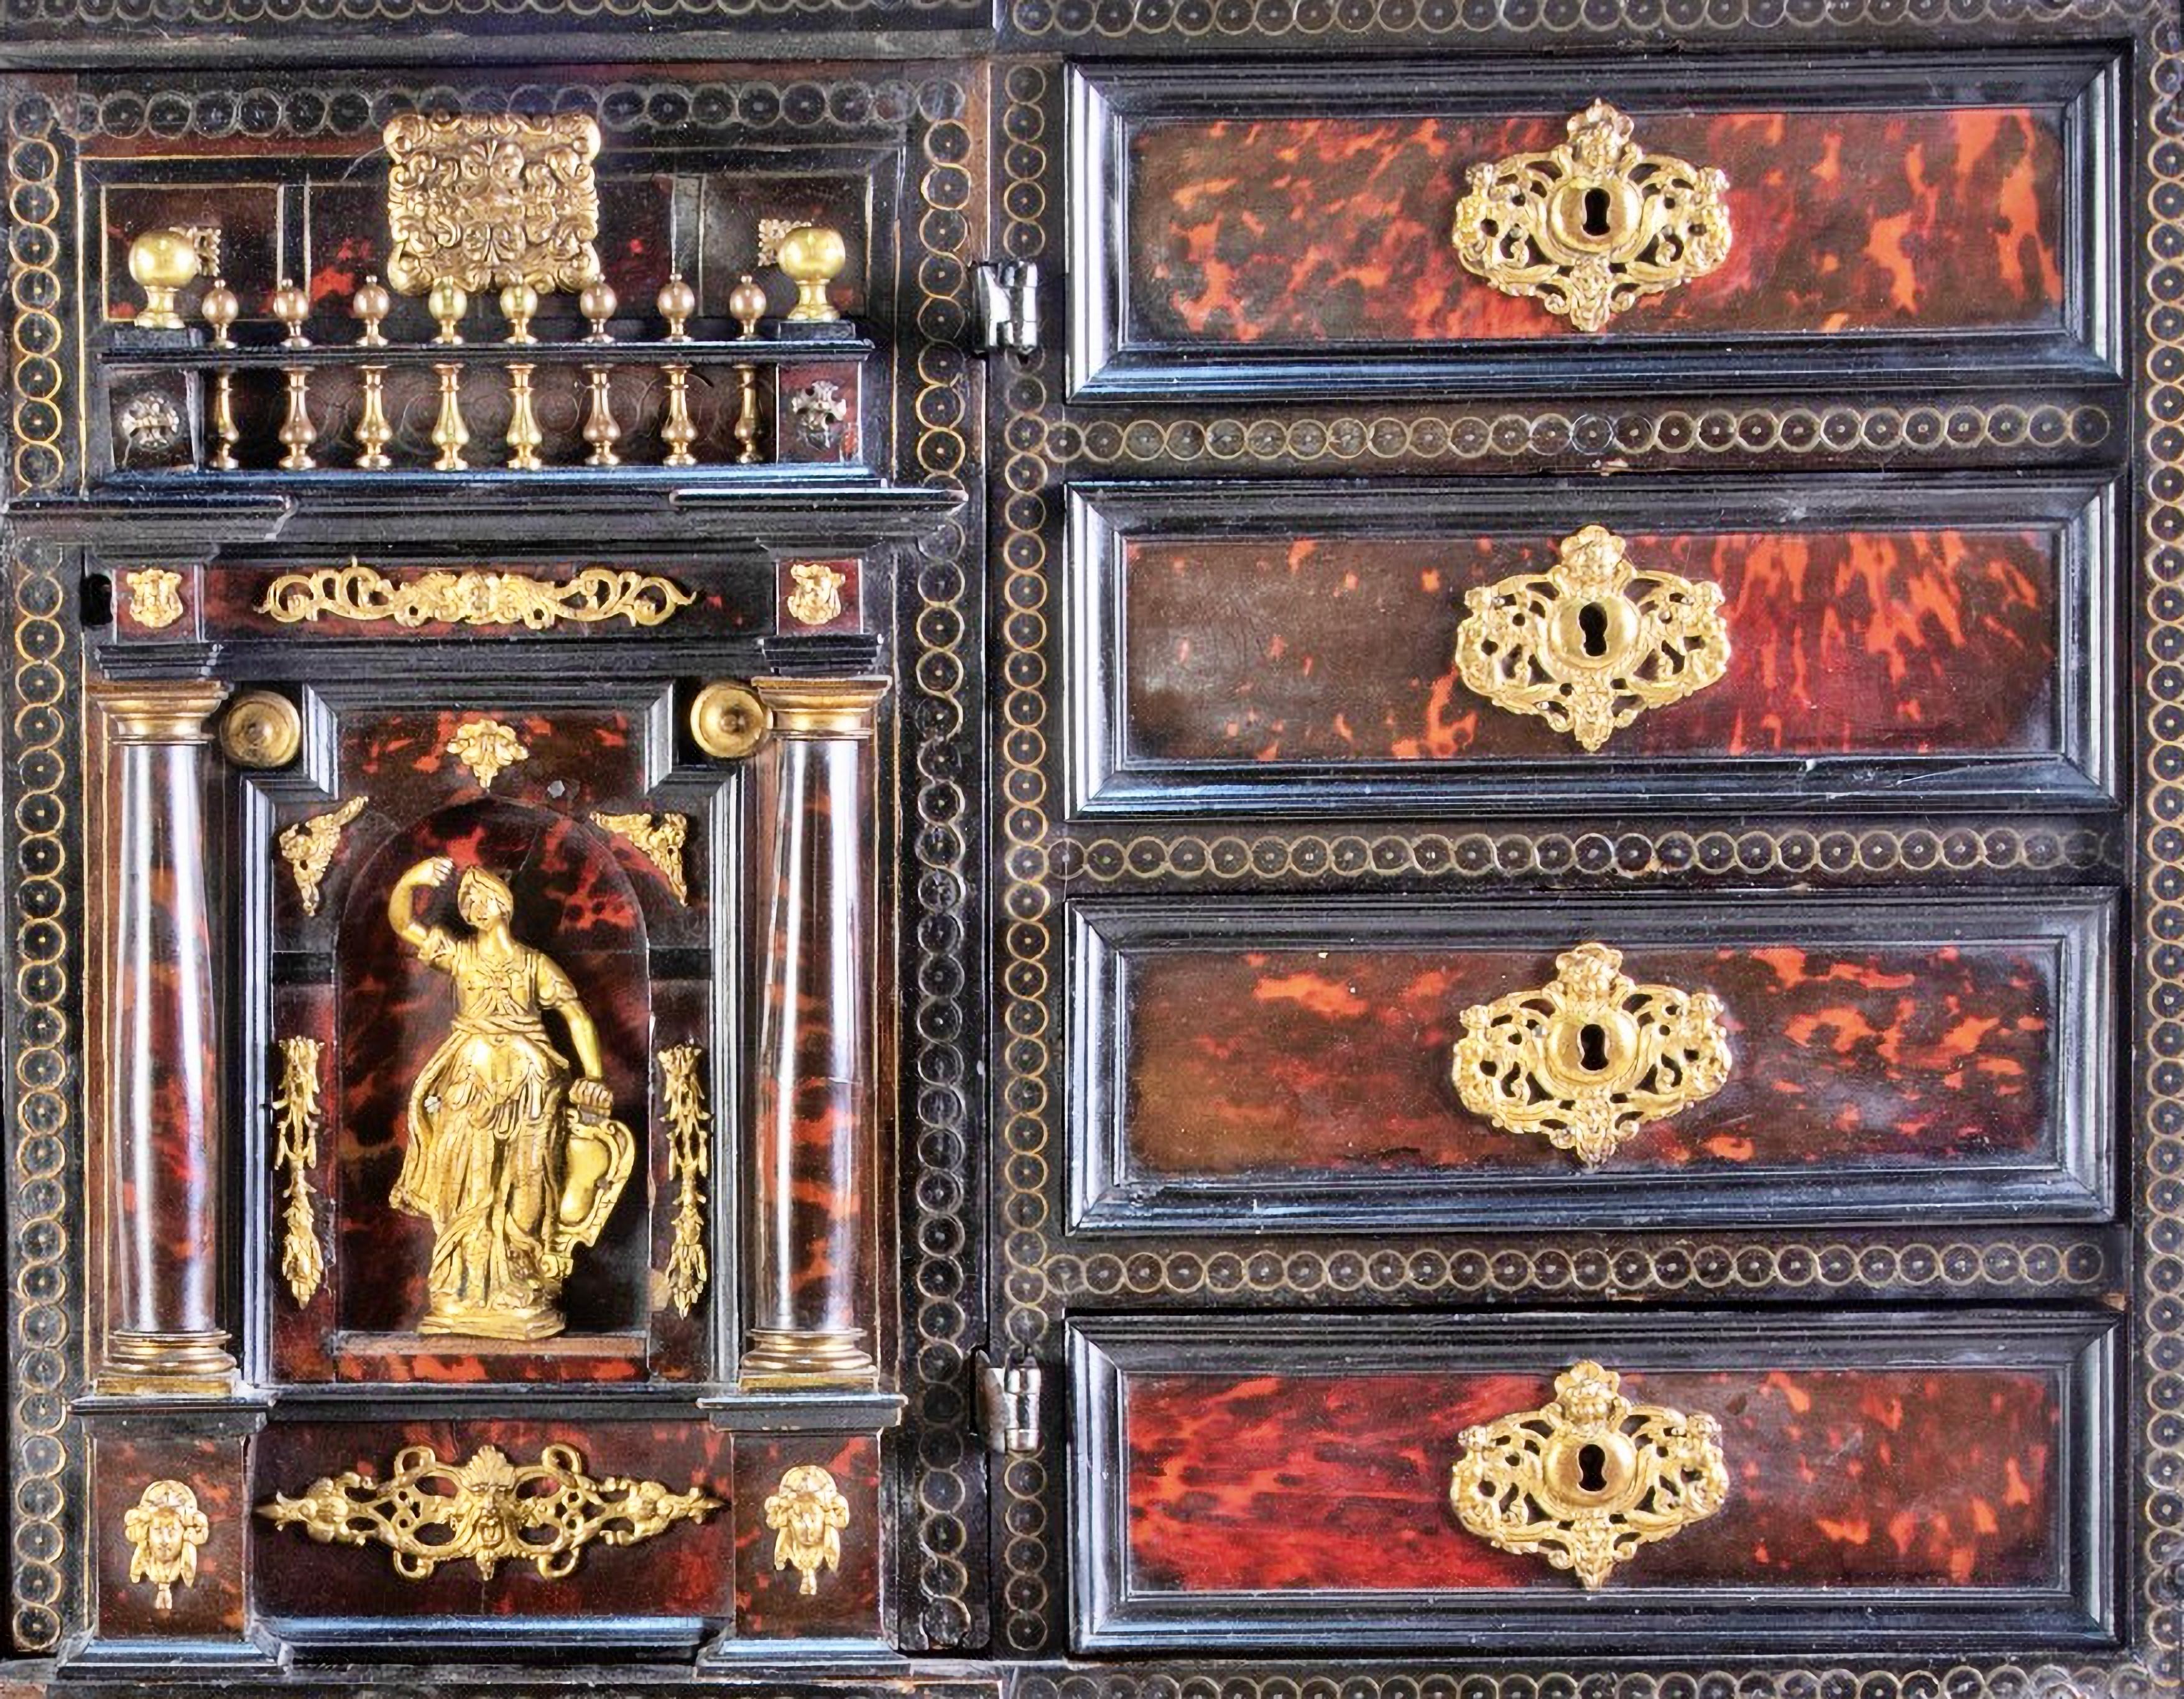 Architectural front litter bin in tortoiseshell, ebonized wood, brass, rosewood and bronze.

Cabinet Spanish-Flemish work 17th Century

measures: 63 x 34 x 106 cm.

Central door, with the figure of Pallas Athena, flanked by Doric columns,